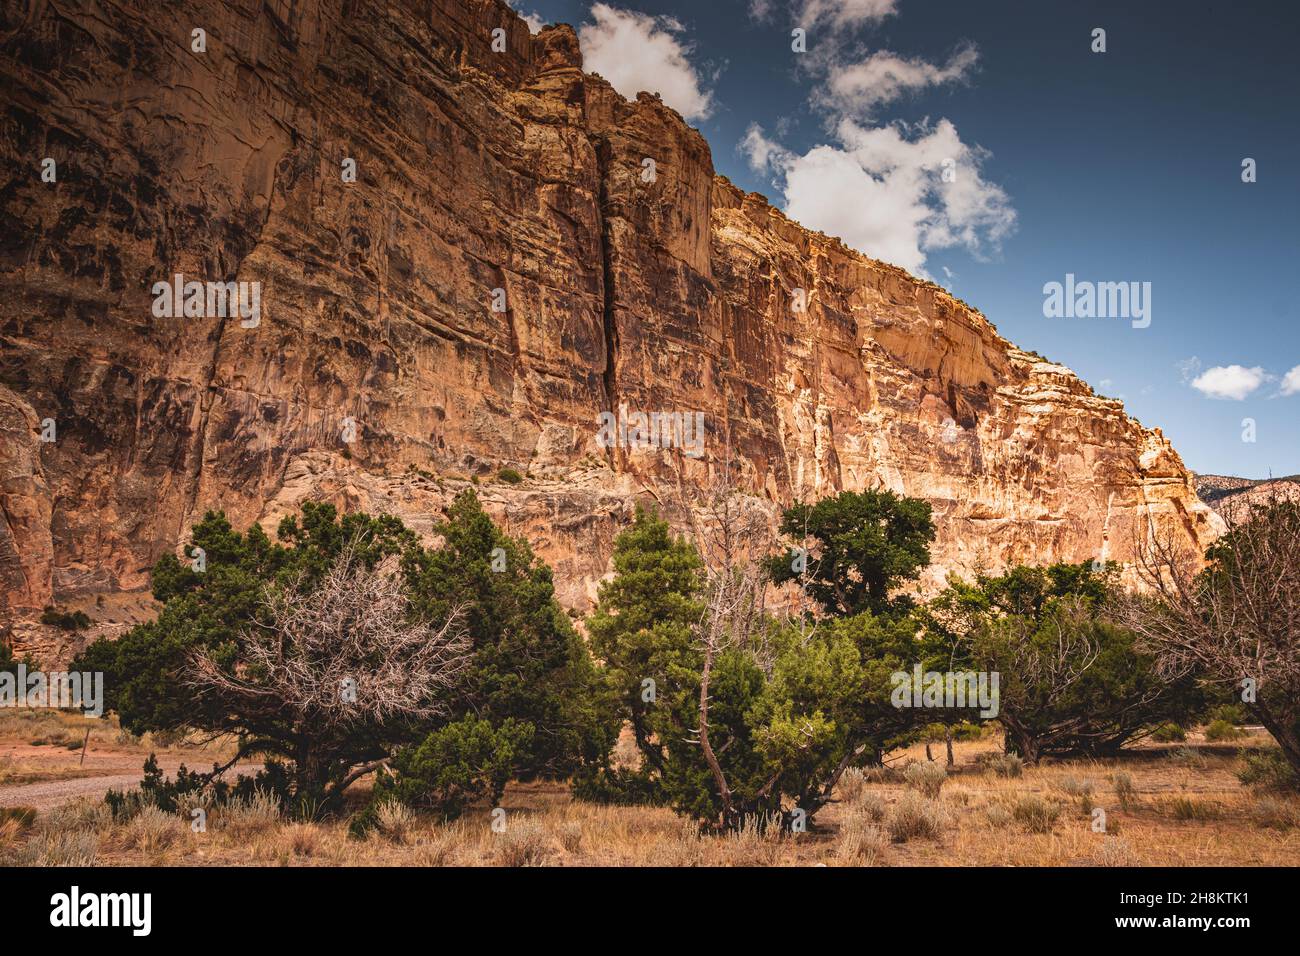 Landscape photo on a stone wall background in Echo Park Campground, Dinosaur Nation Monument, Utah and Colorado, USA Stock Photo